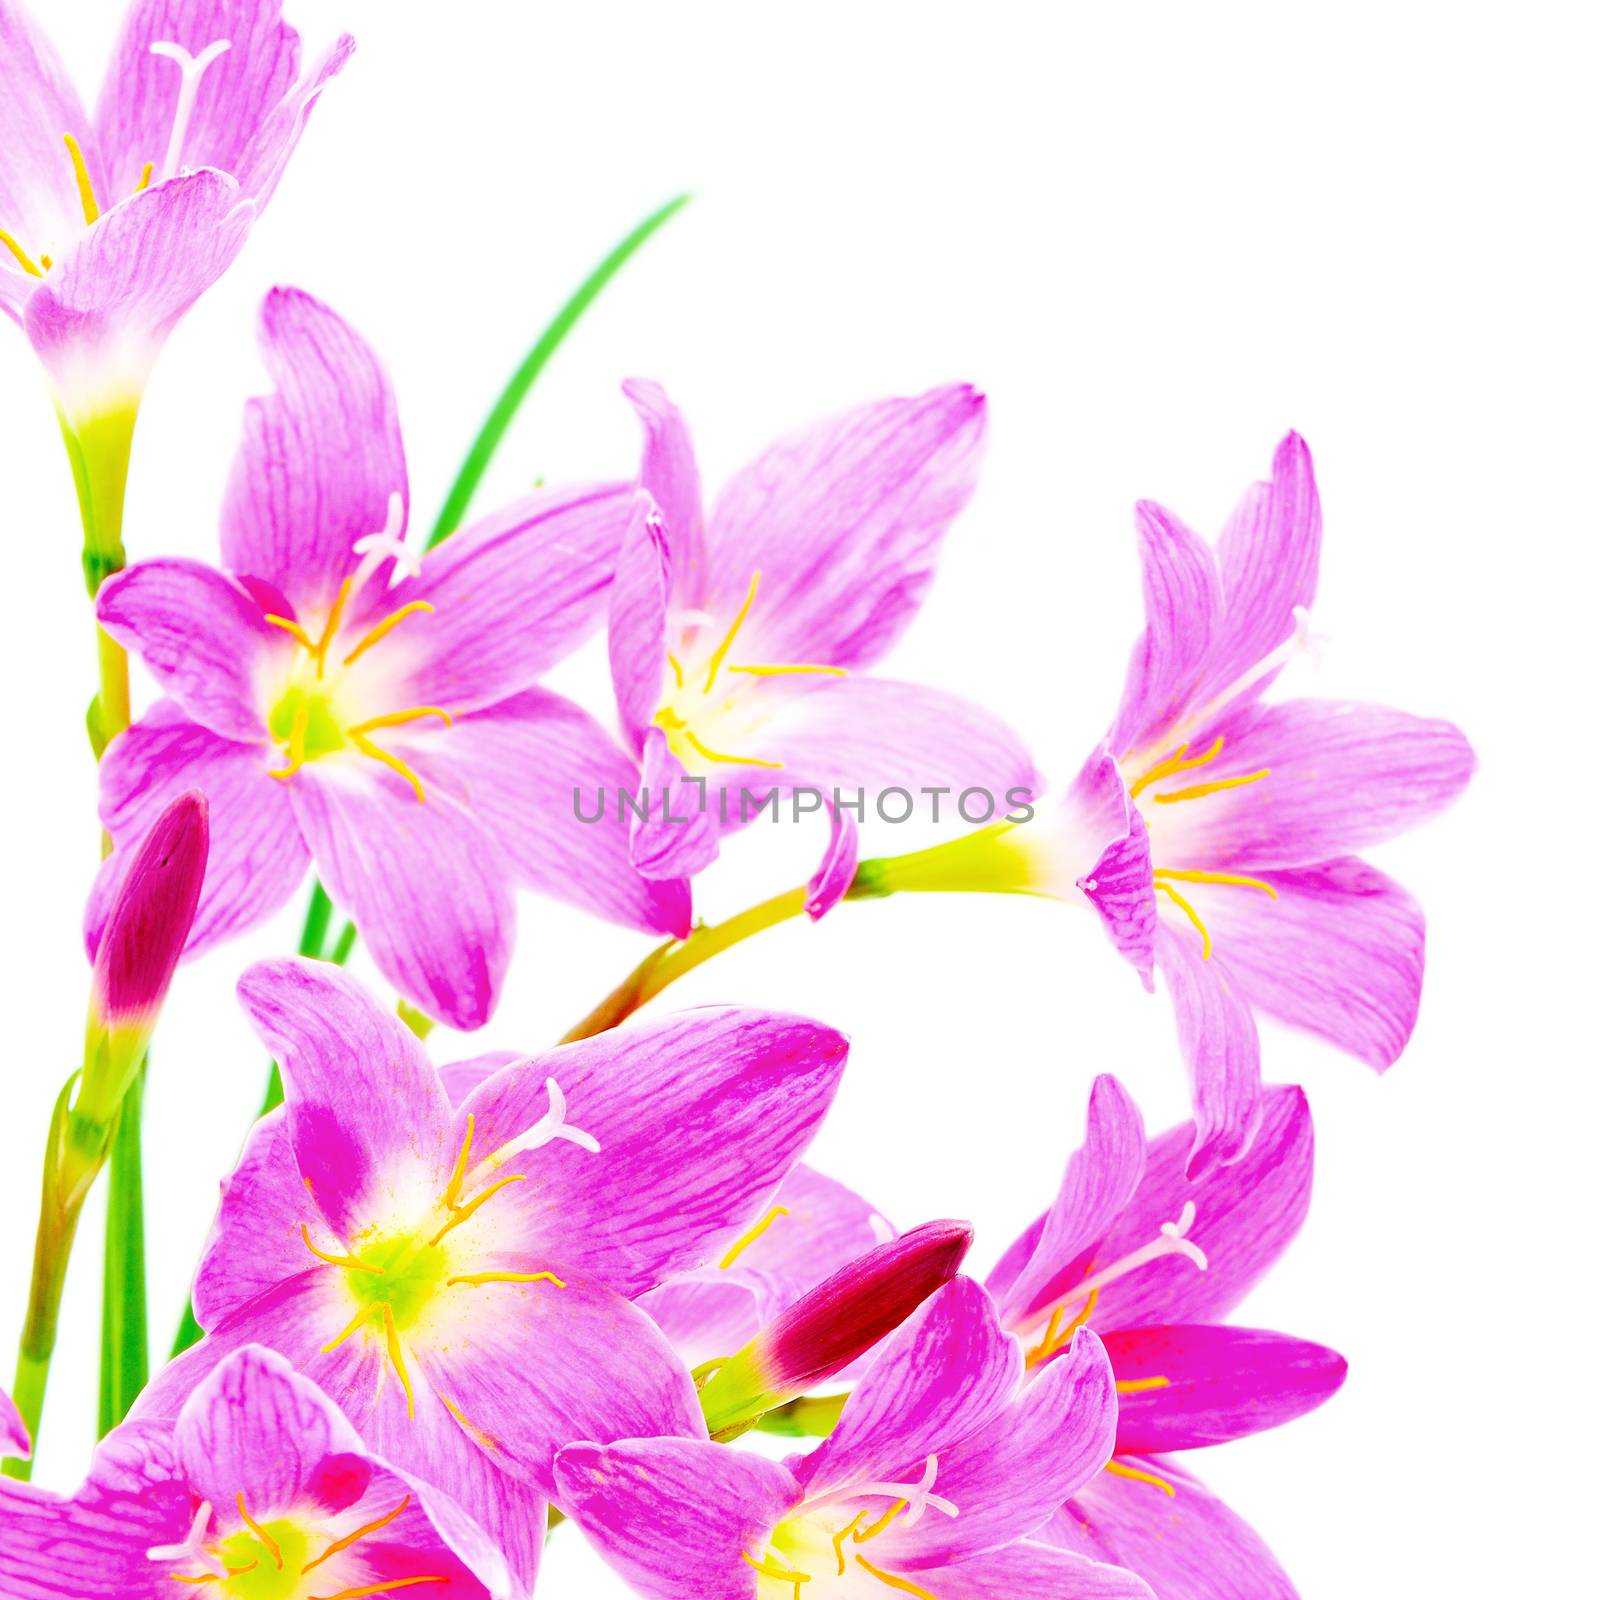 Blossom of pink Zephyranthes Lily, Rain Lily, Fairy Lily, Little Witches, isolated on a whte background